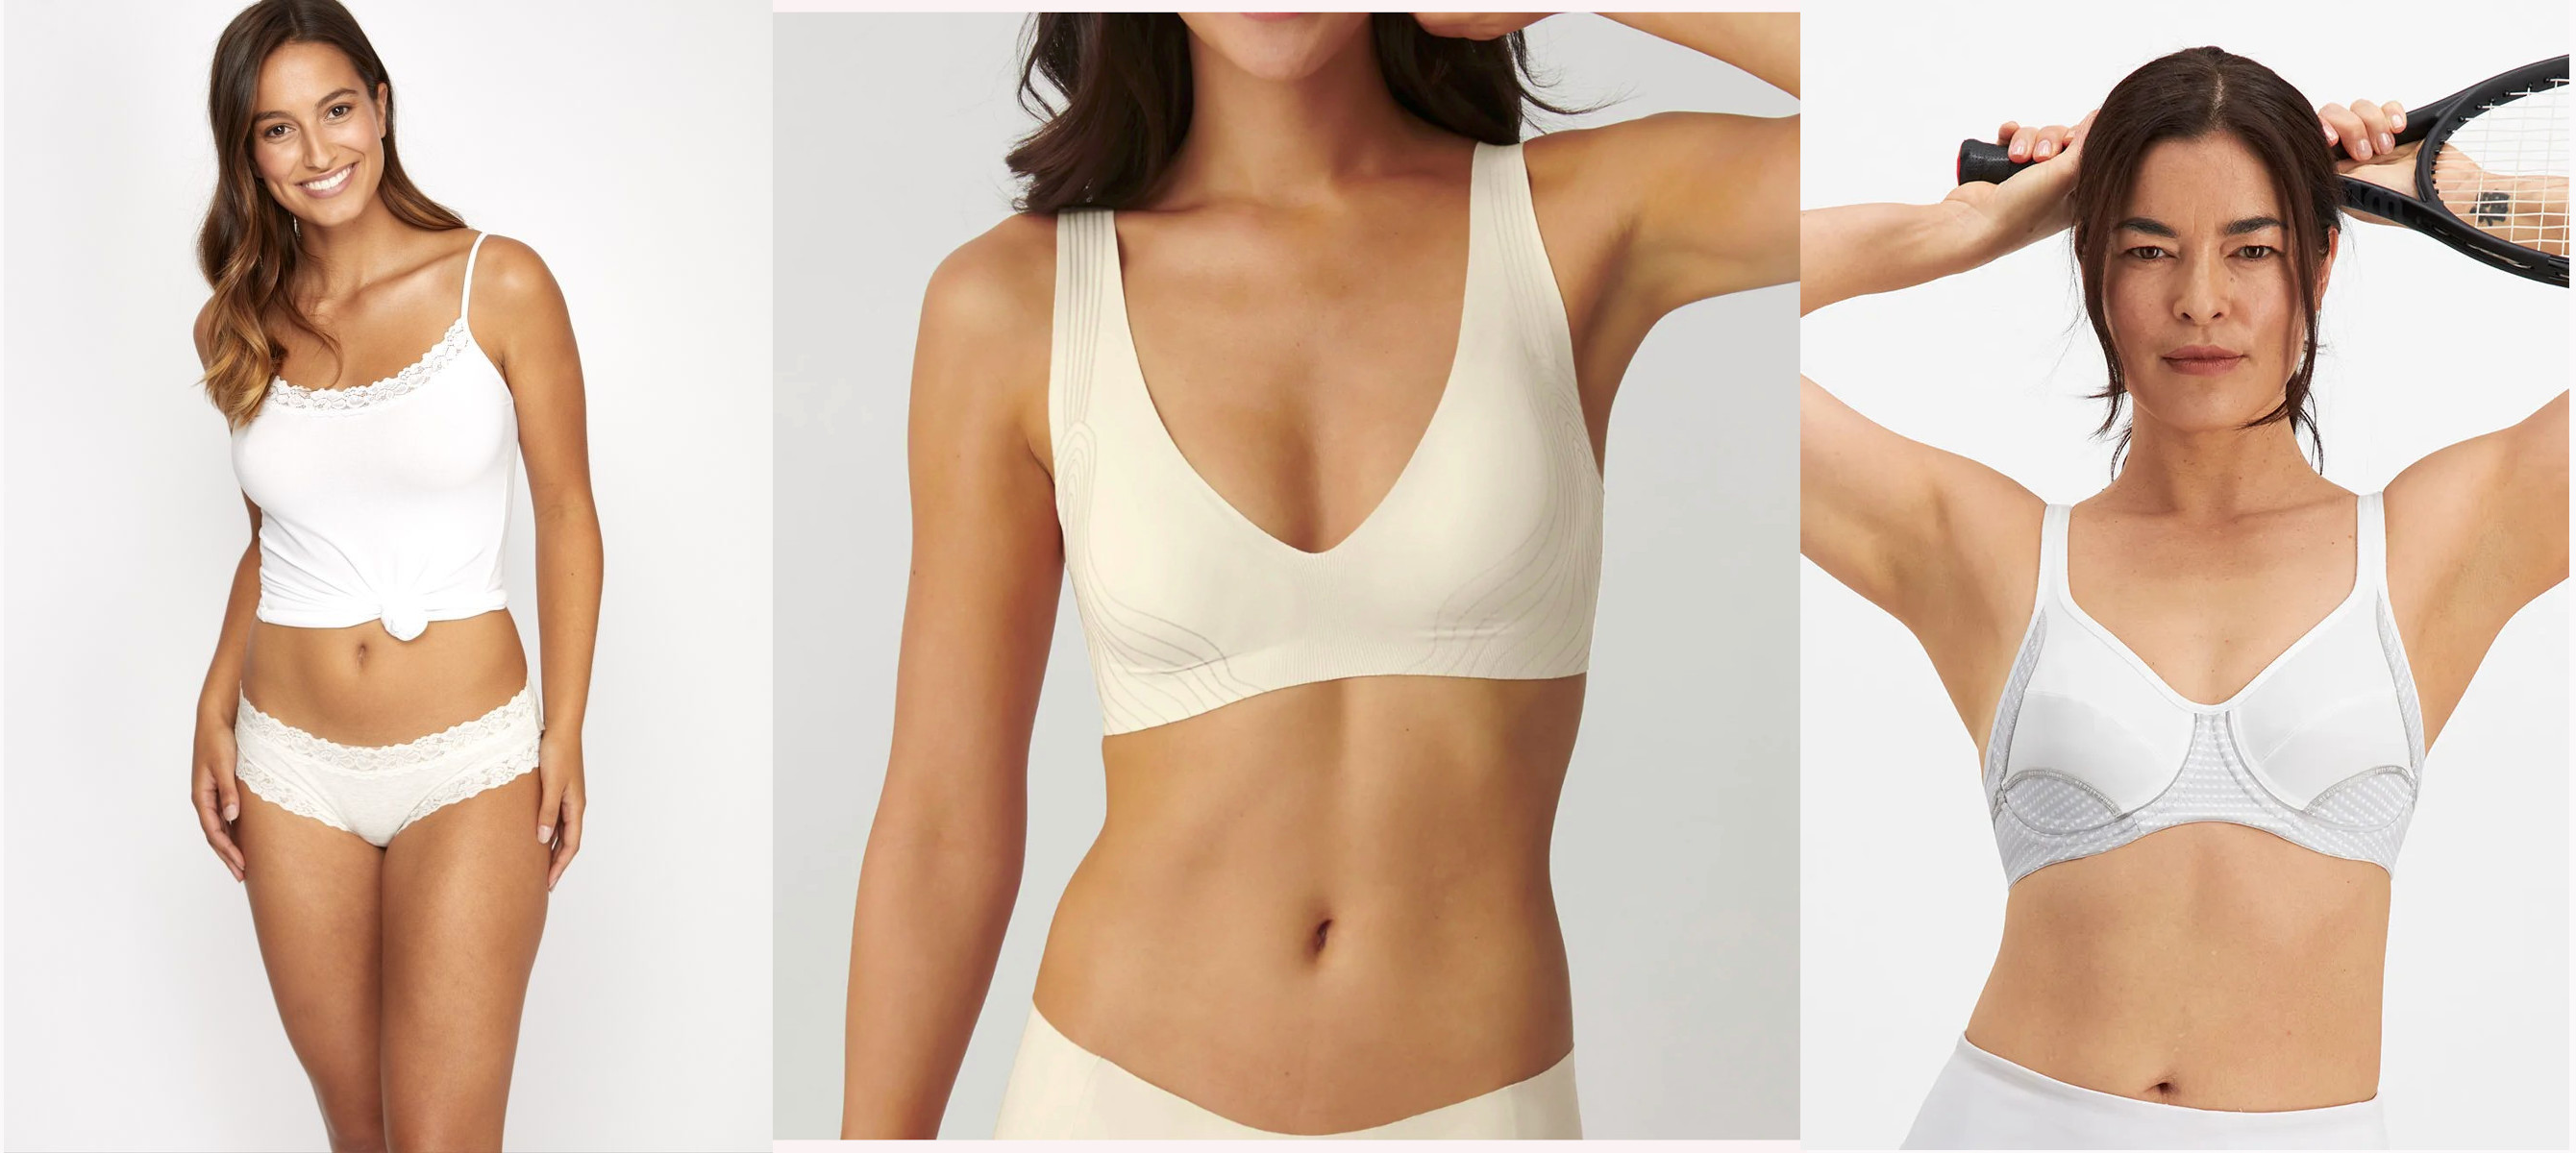 – New Zealand's online shop for bras and lingerie.